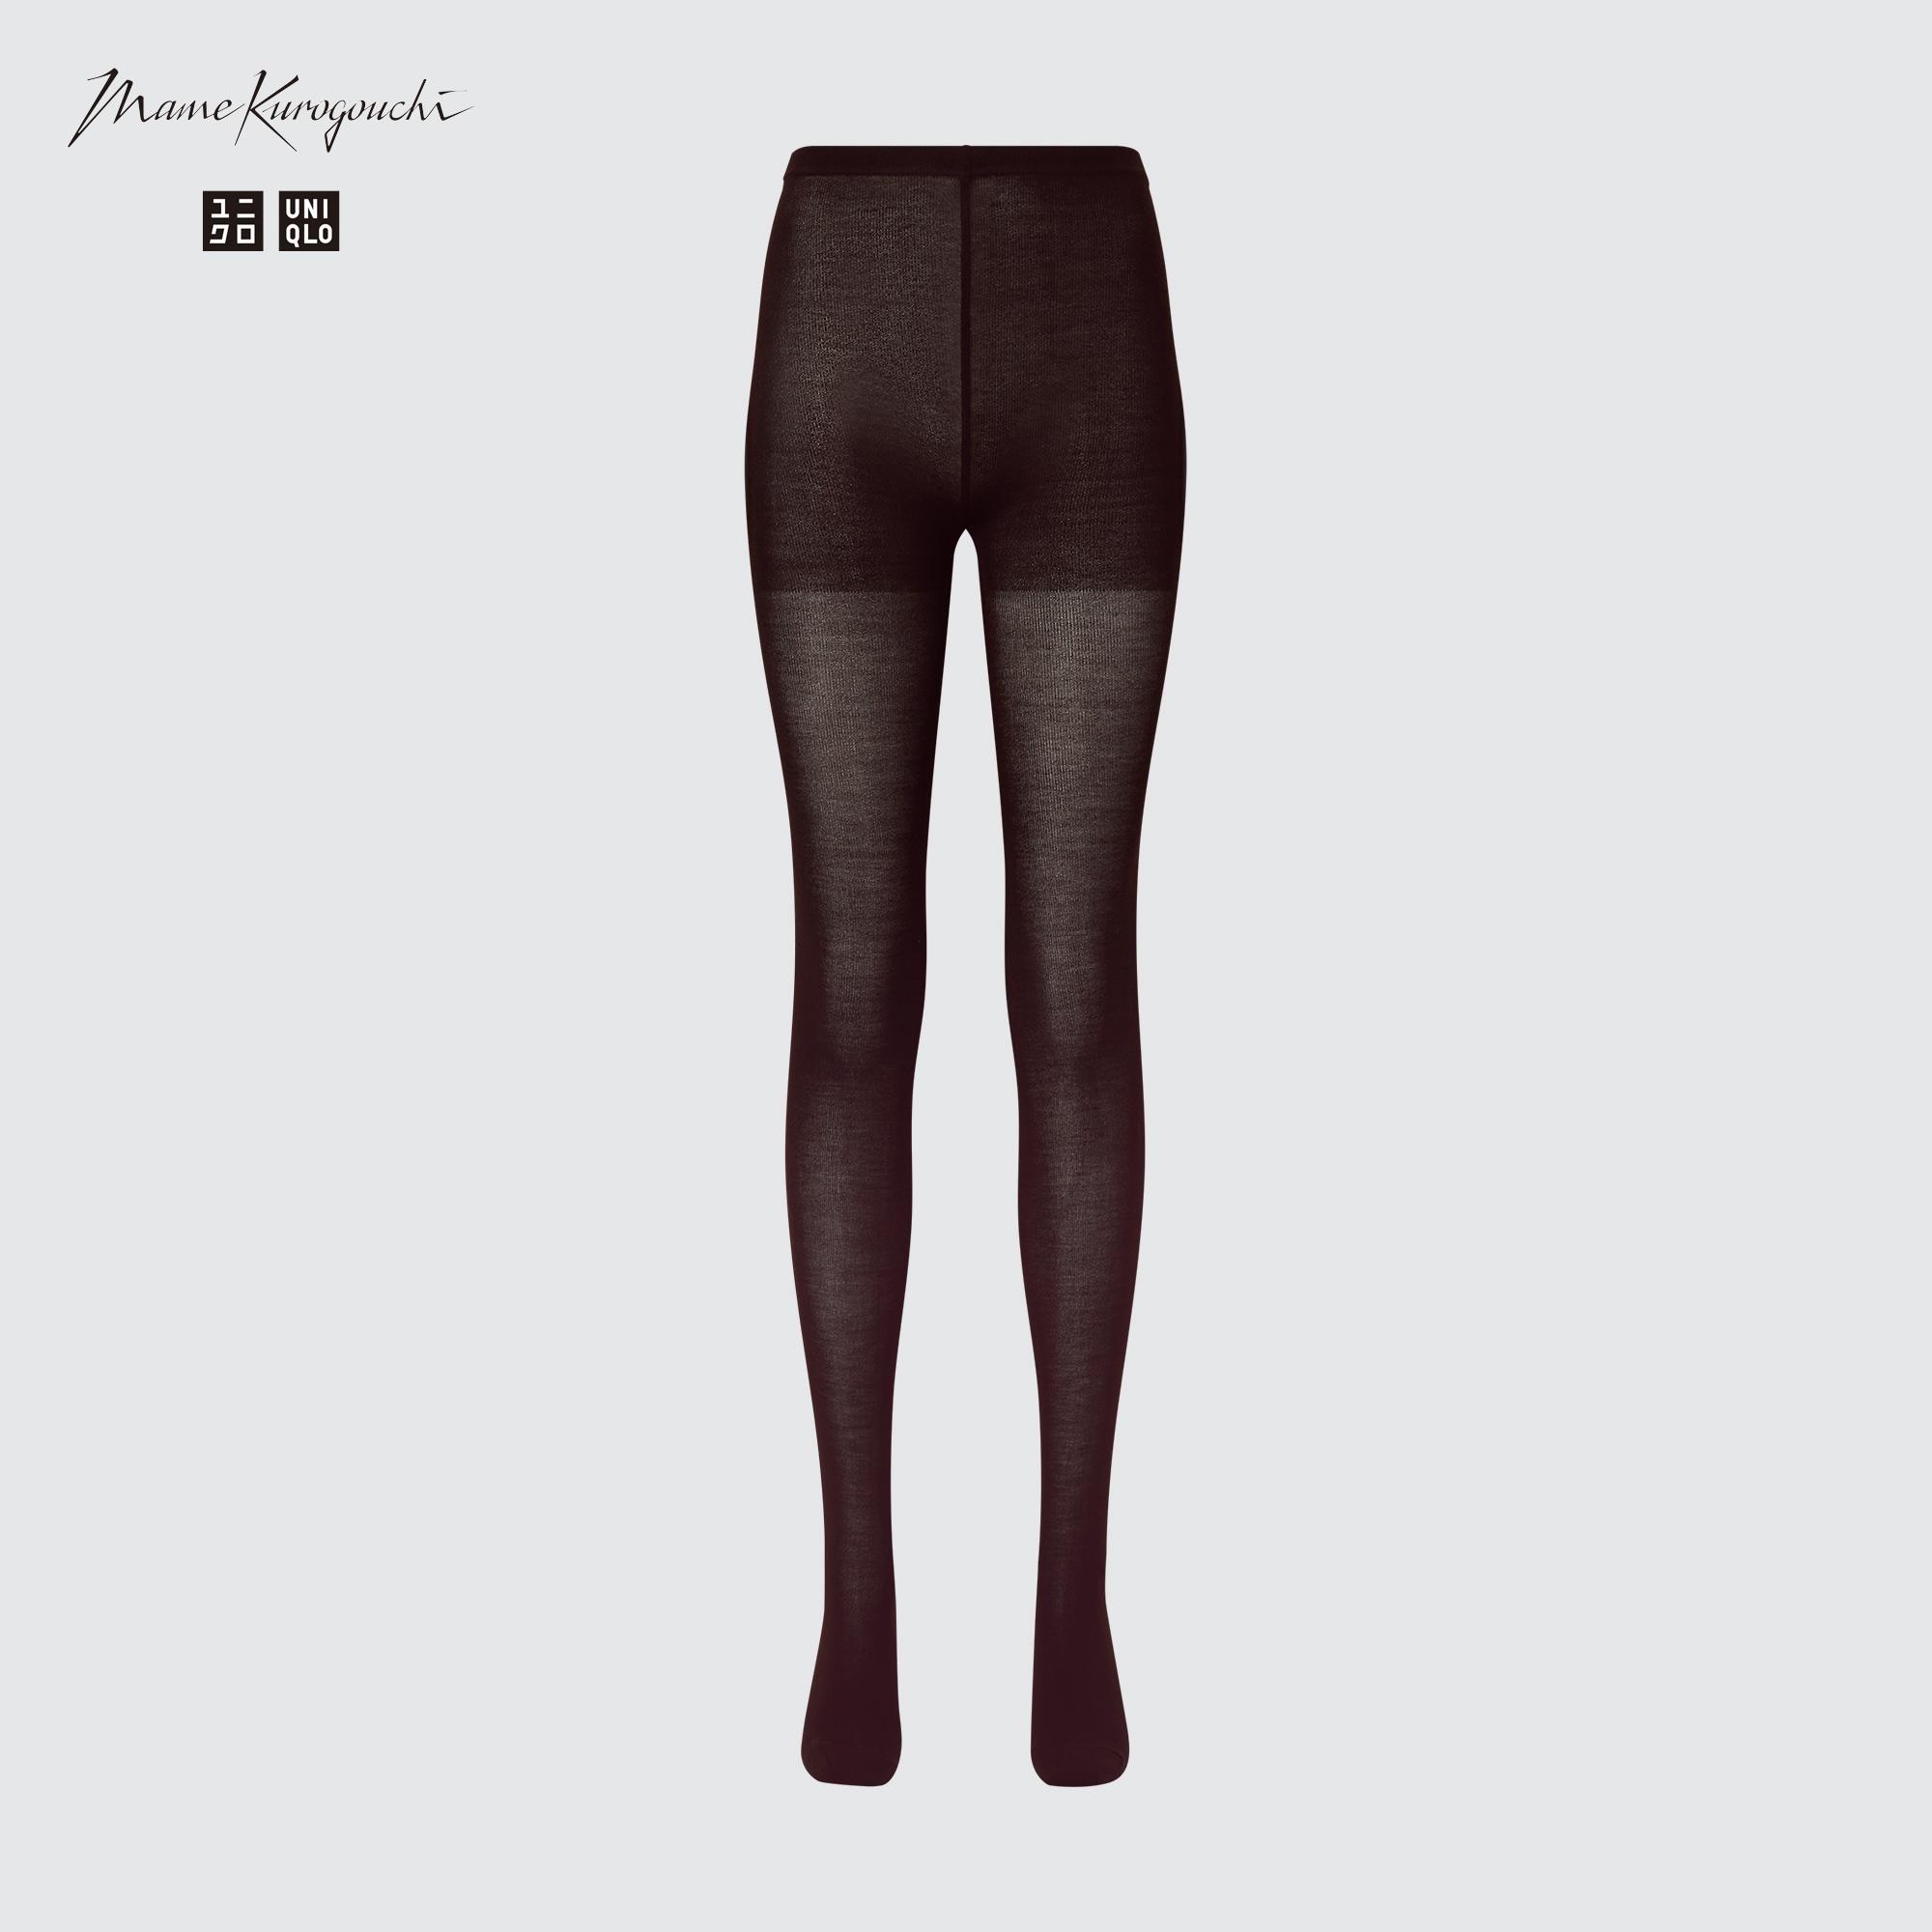 UNIQLO on X: Our #HEATTECH Tights are designed w/ quick-dry